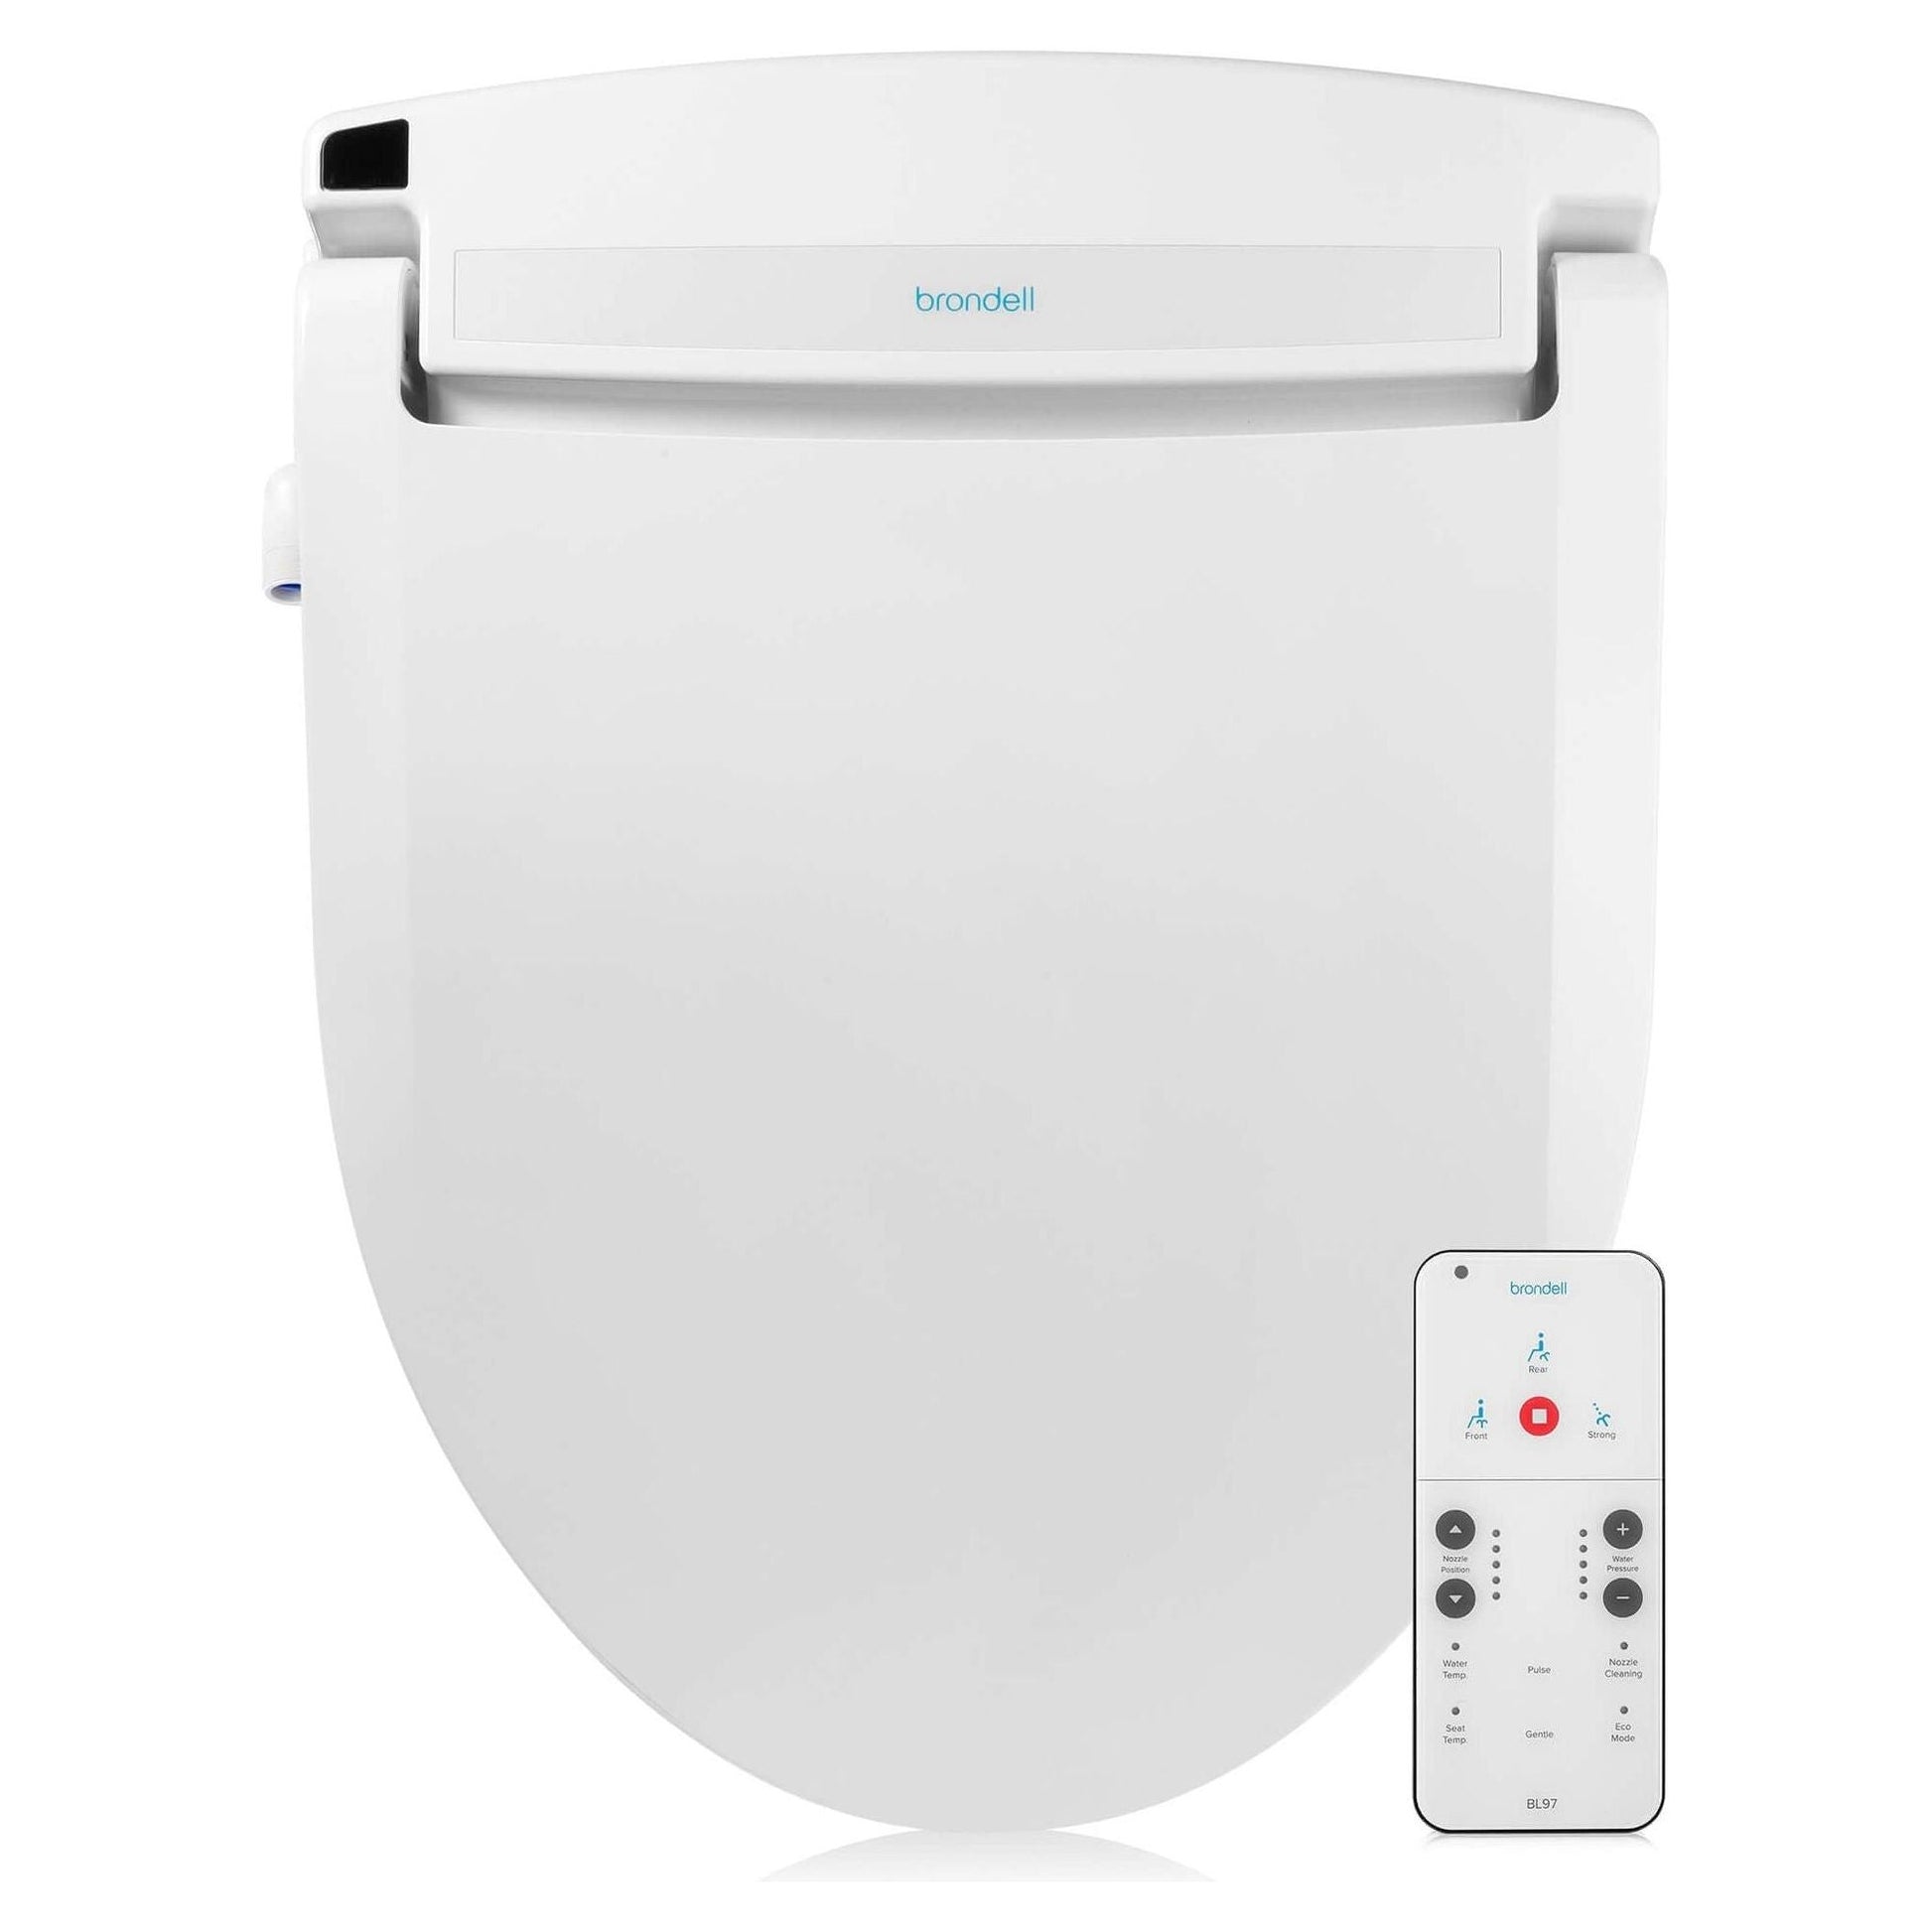 Swash Select BL97 Bidet Seat - top view with remote control